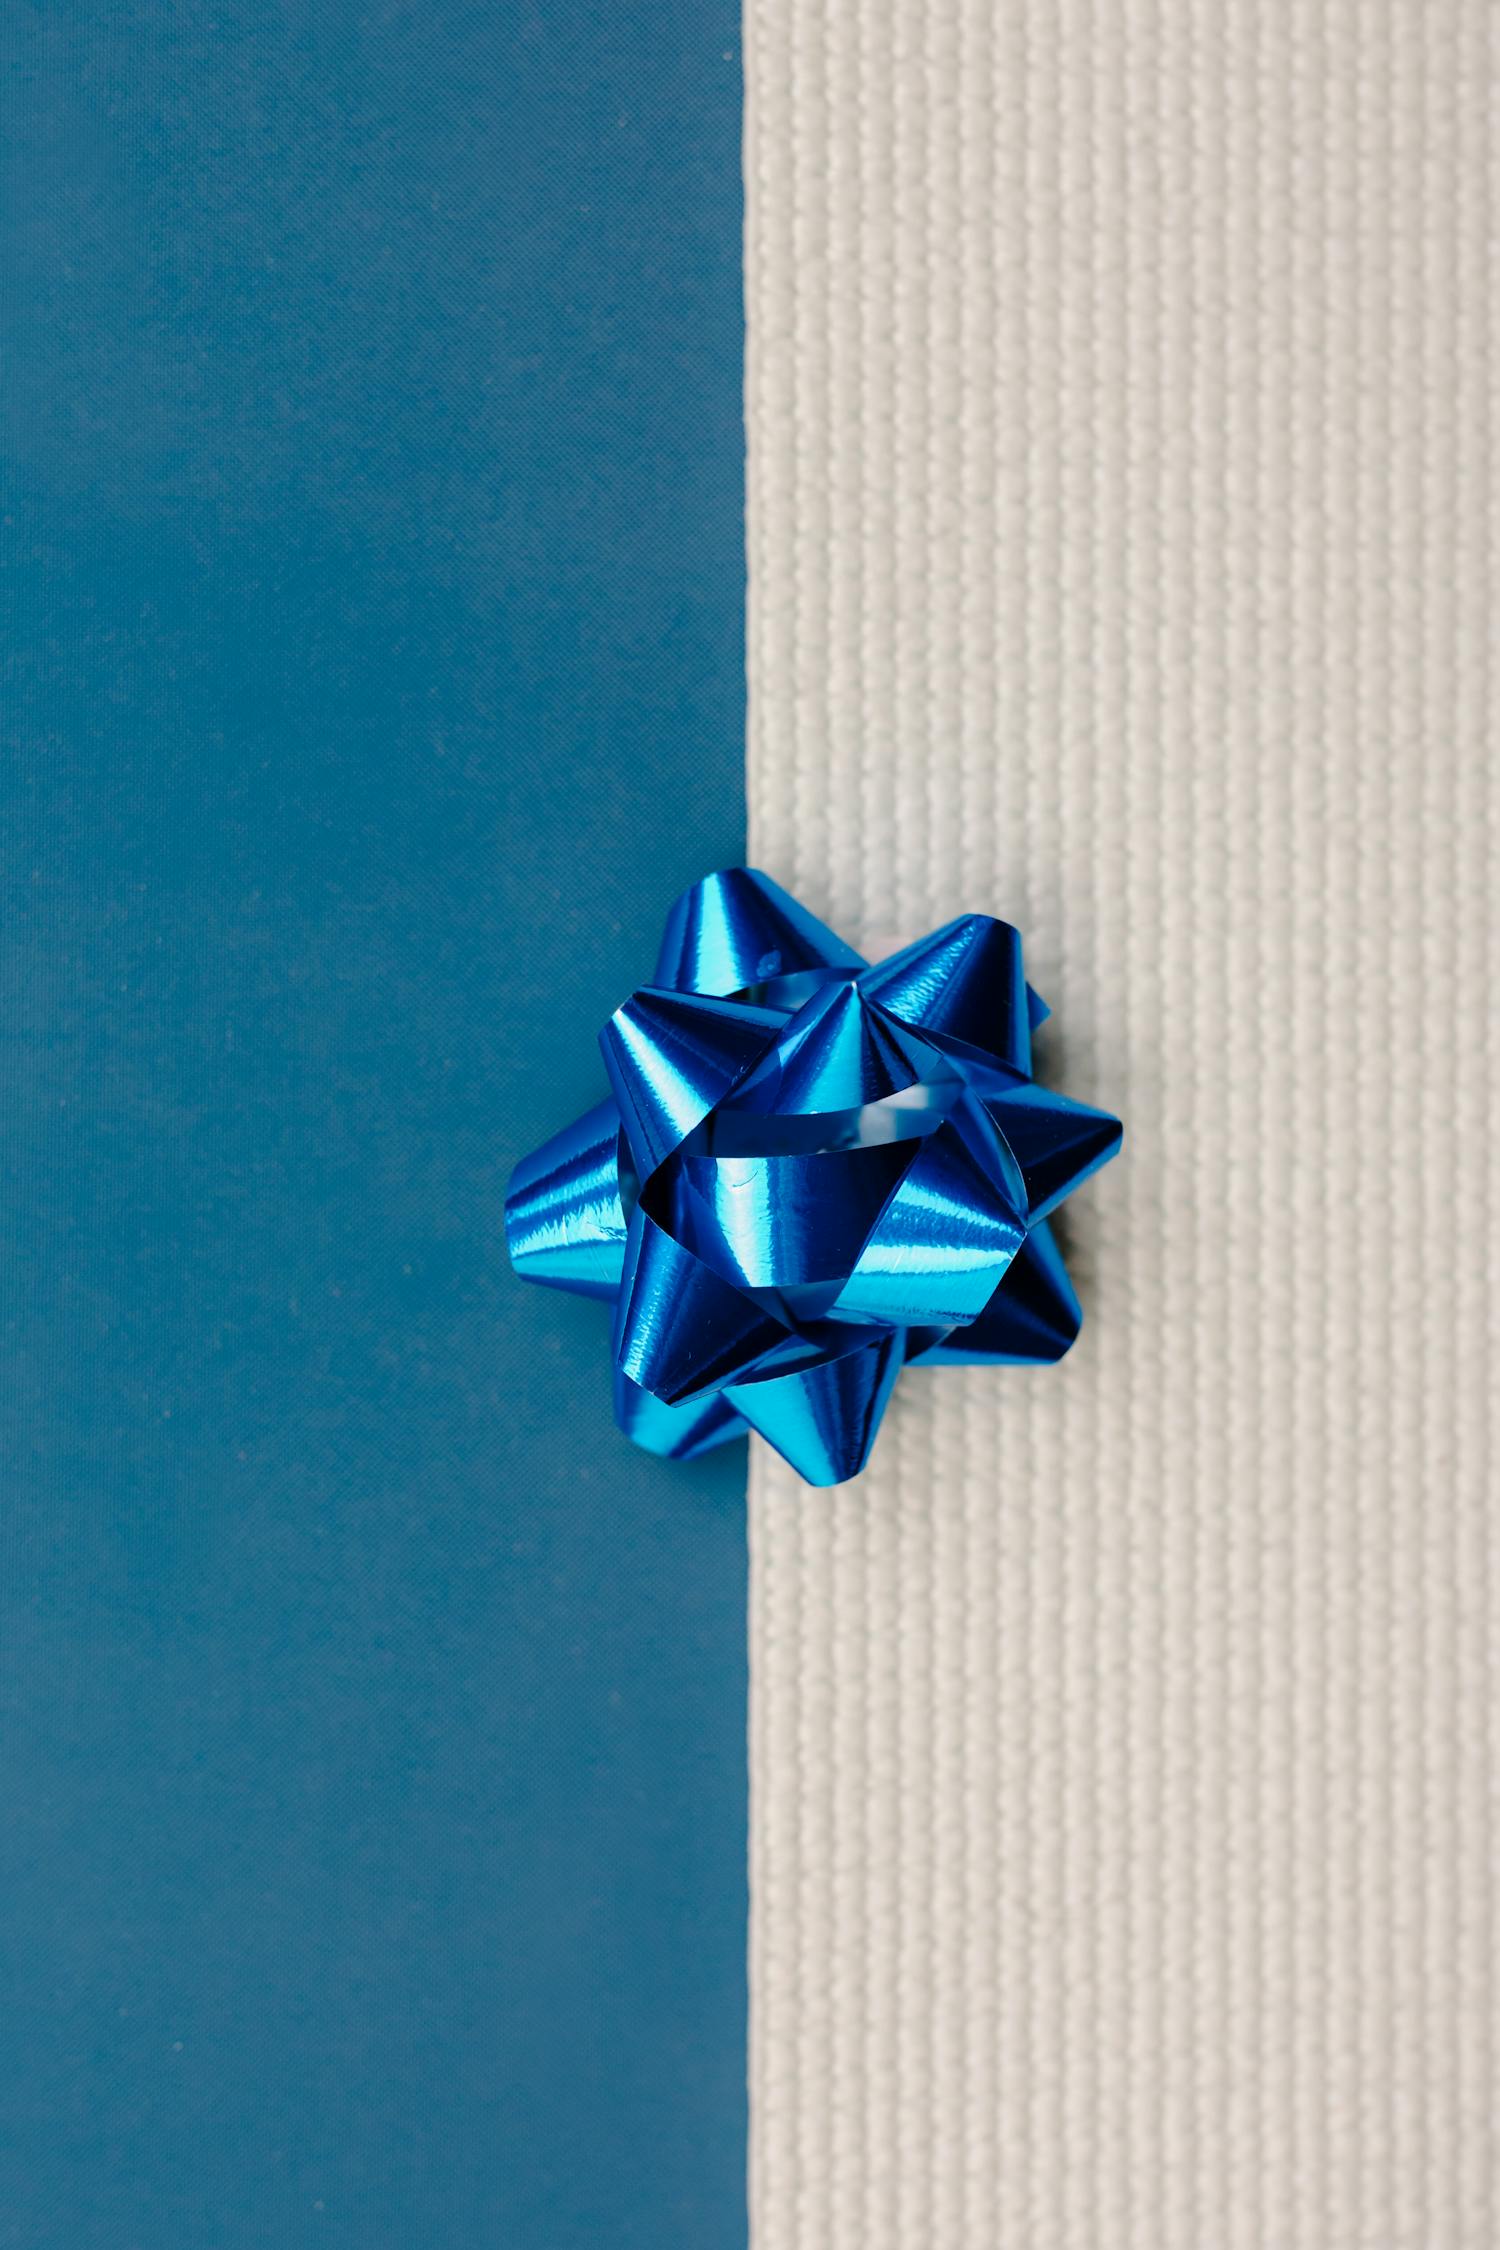 Blue and White Ribbon on Blue and White Textile · Free Stock Photo